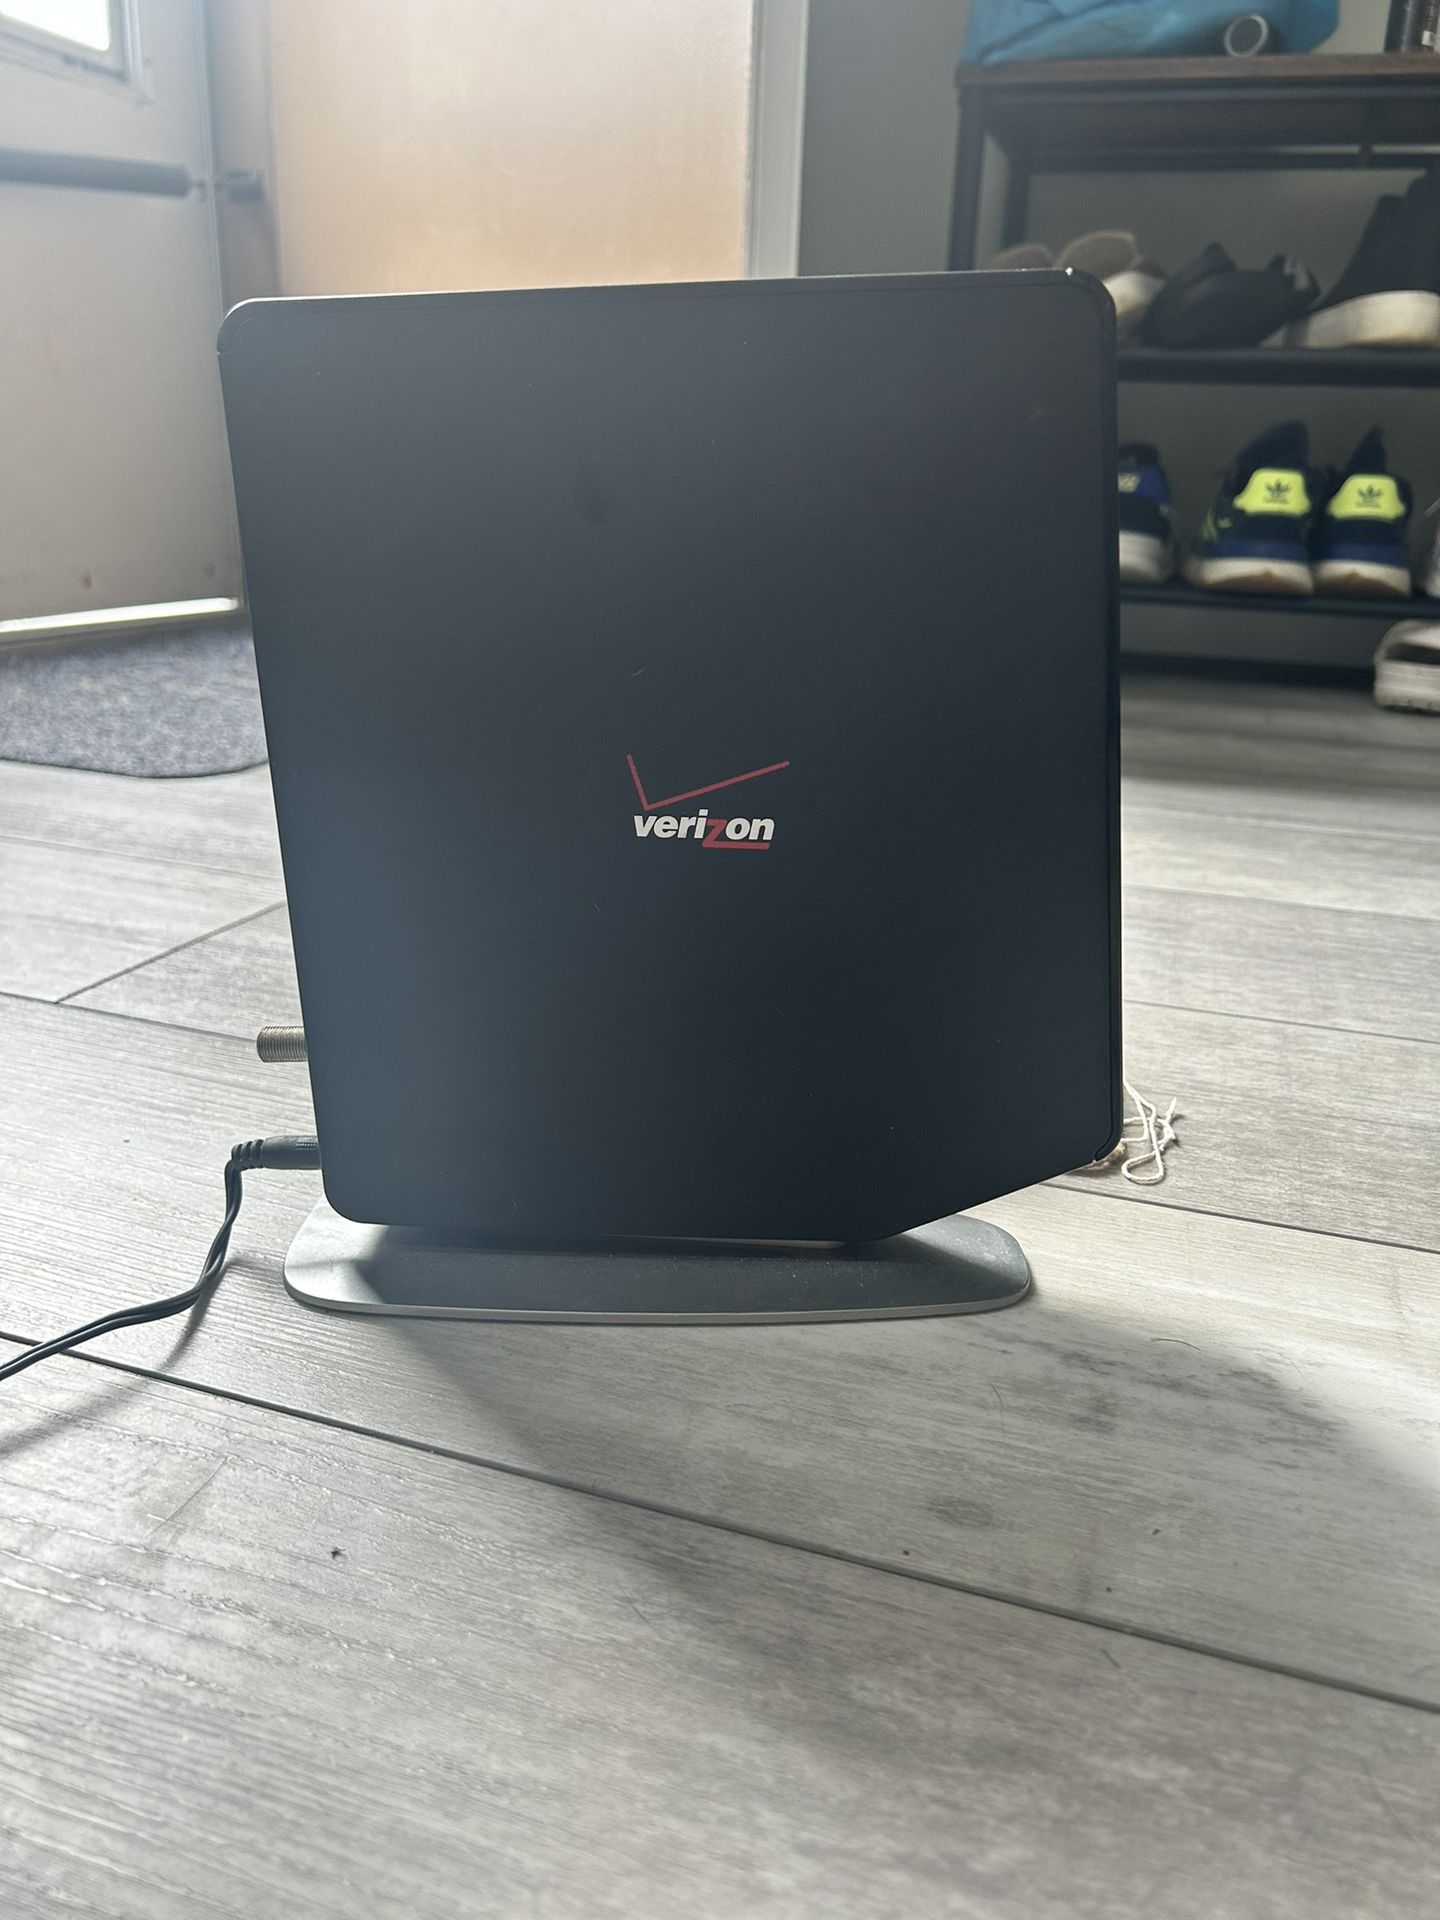 Verizon Fios G1100 Router And Modem